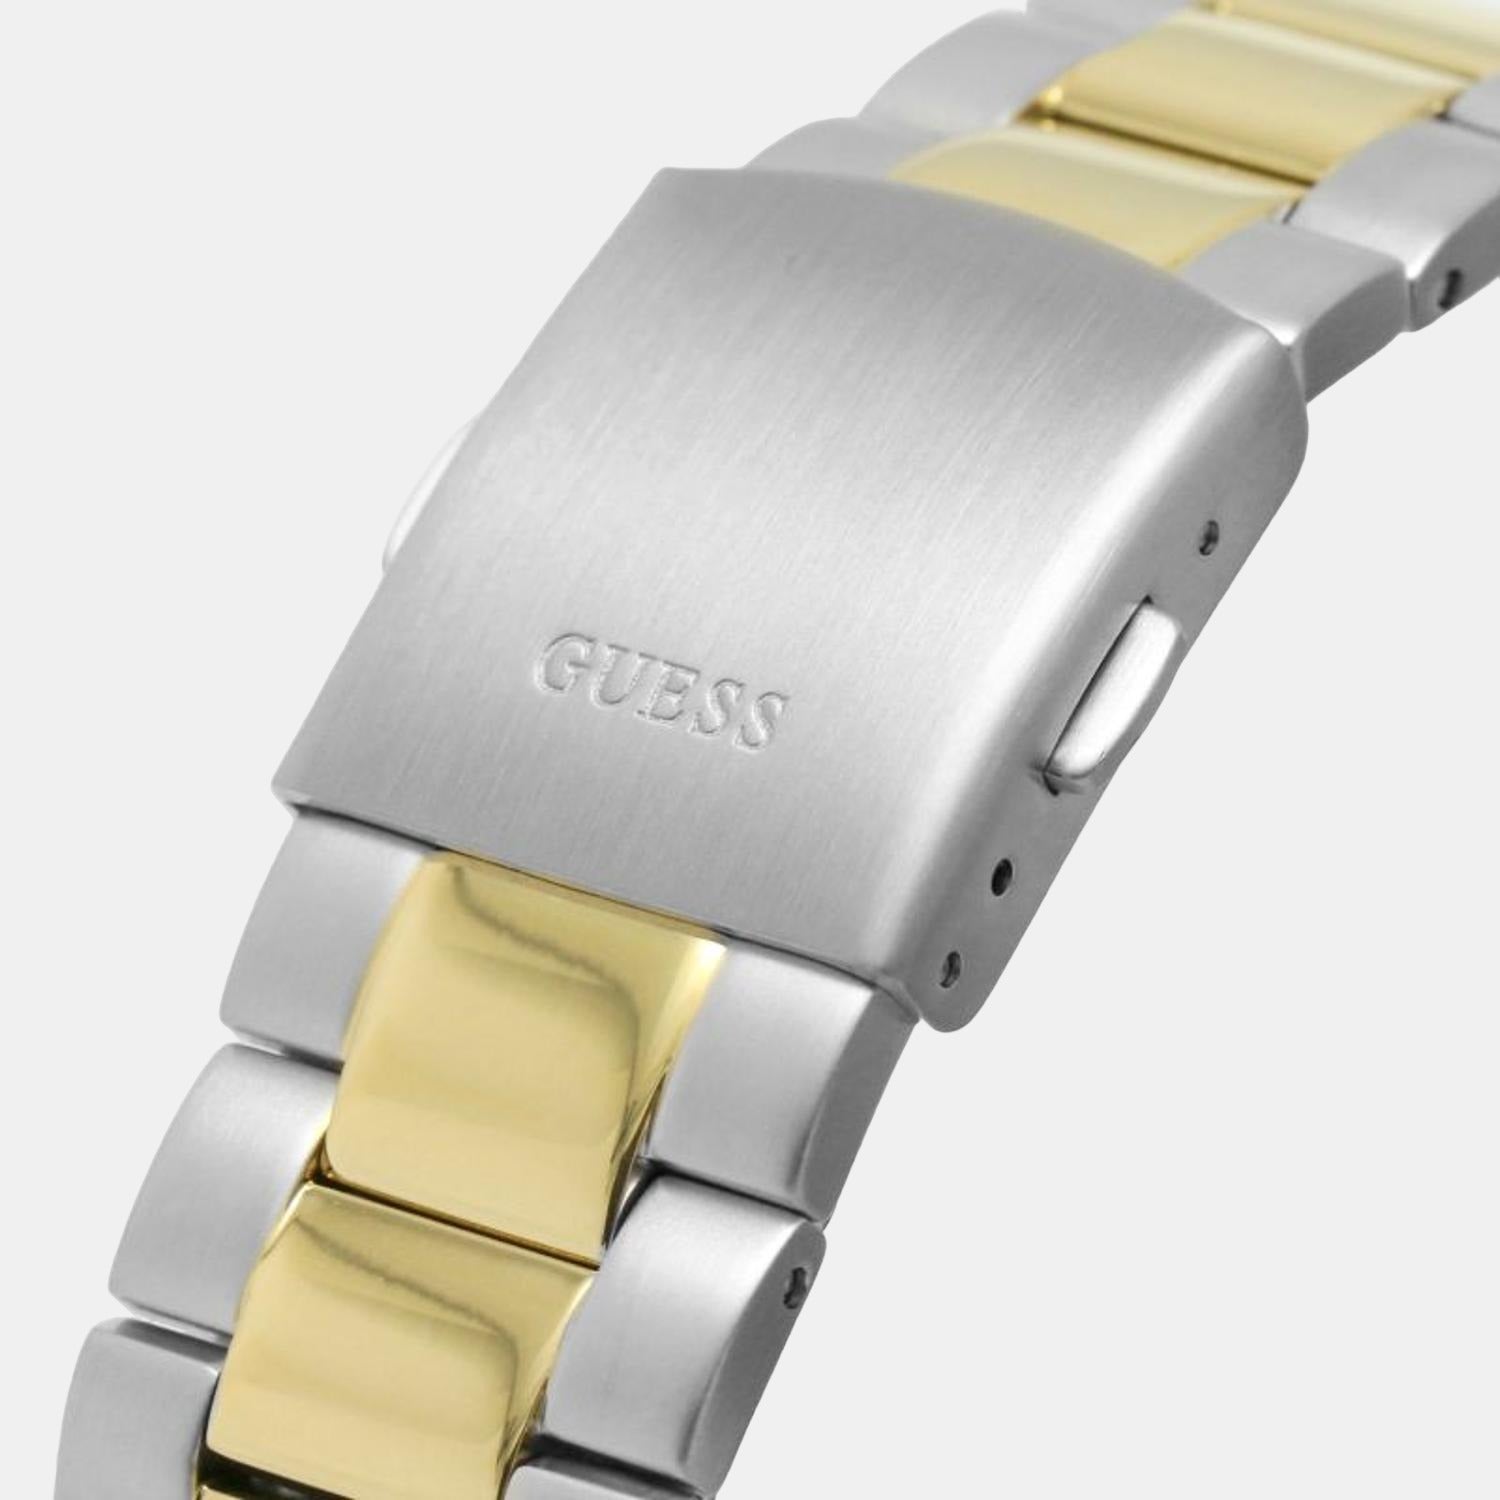 guess-stainless-steel-green-analog-male-watch-gw0265g8